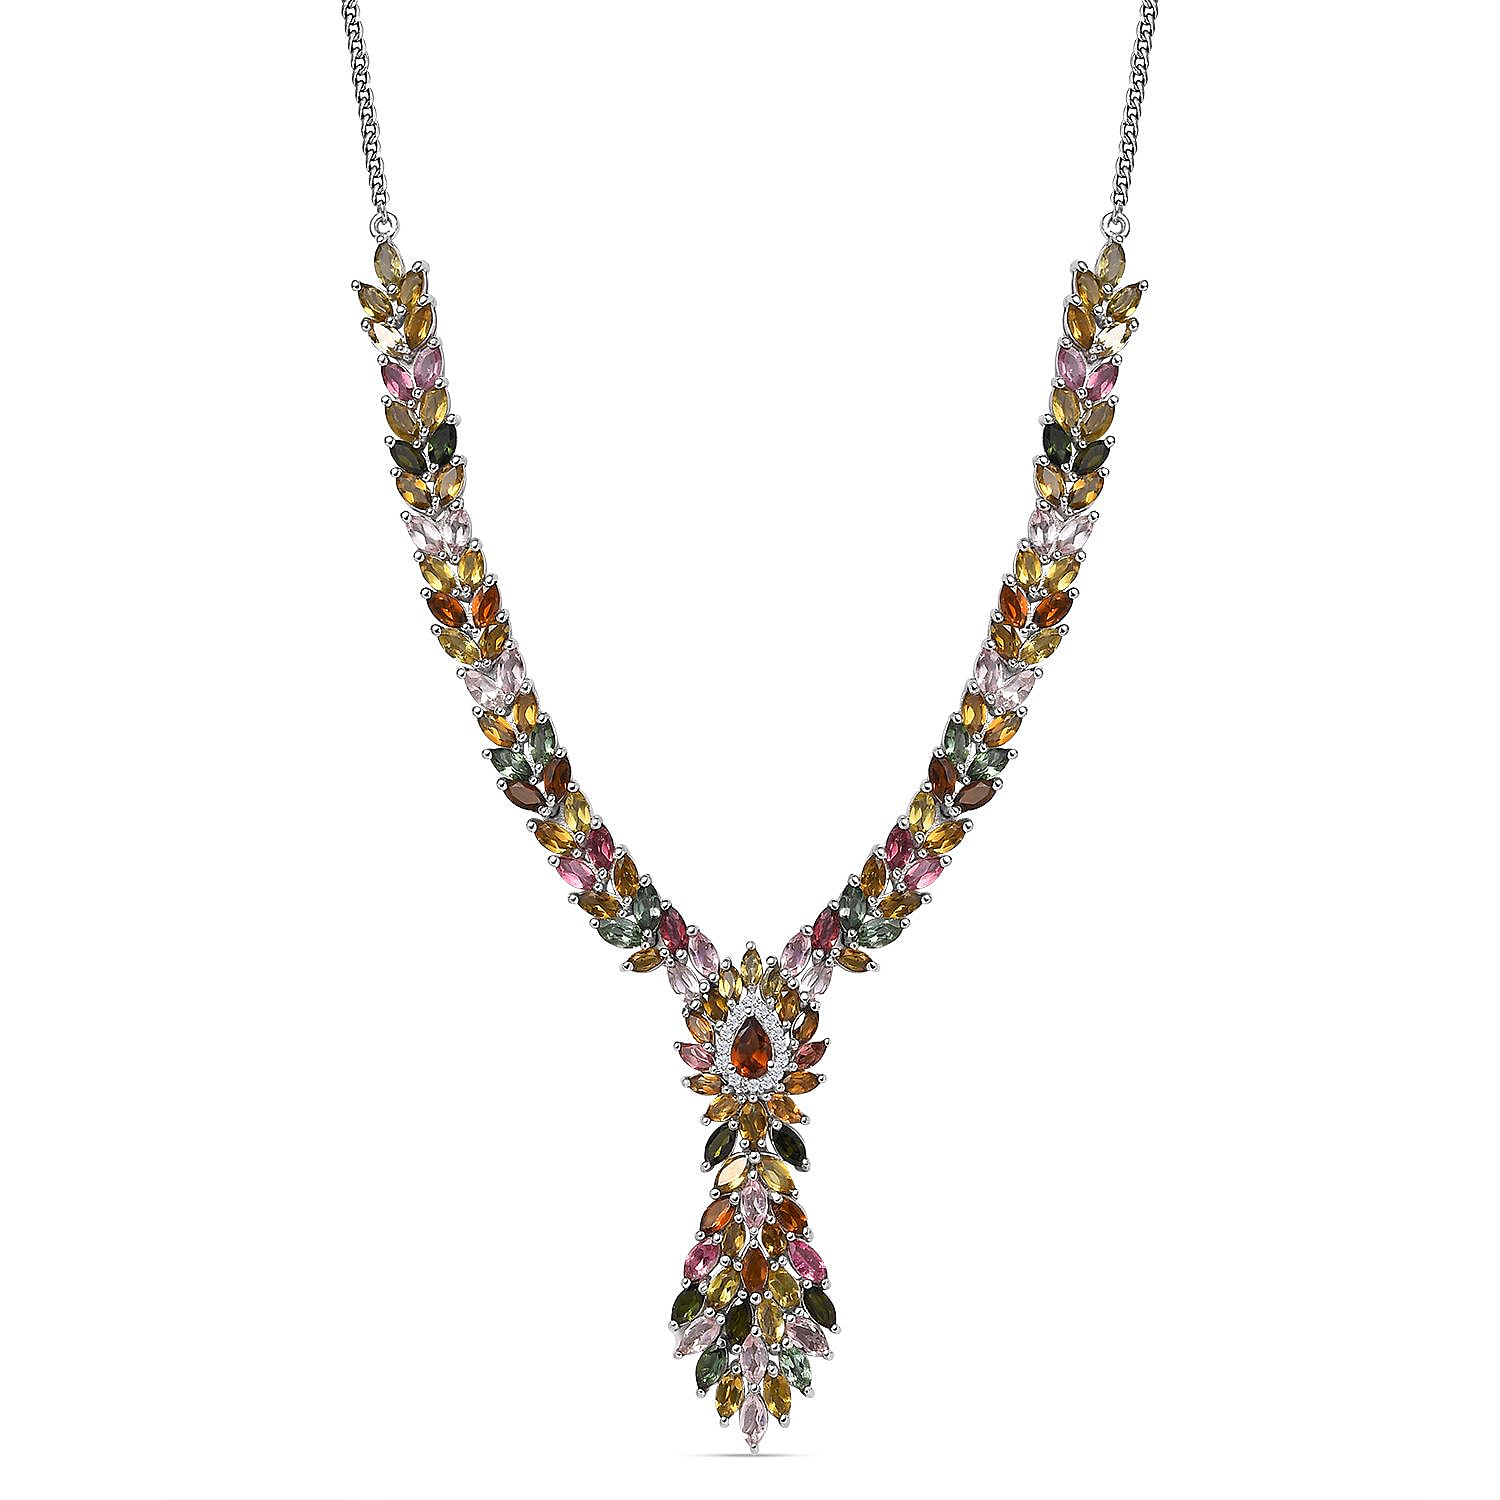 Multi-Tourmaline & Natural Zircon Cluster Necklace in Platinum Overlay Sterling Silver 15.24 Ct, Silver Wt. 19.72 Gms